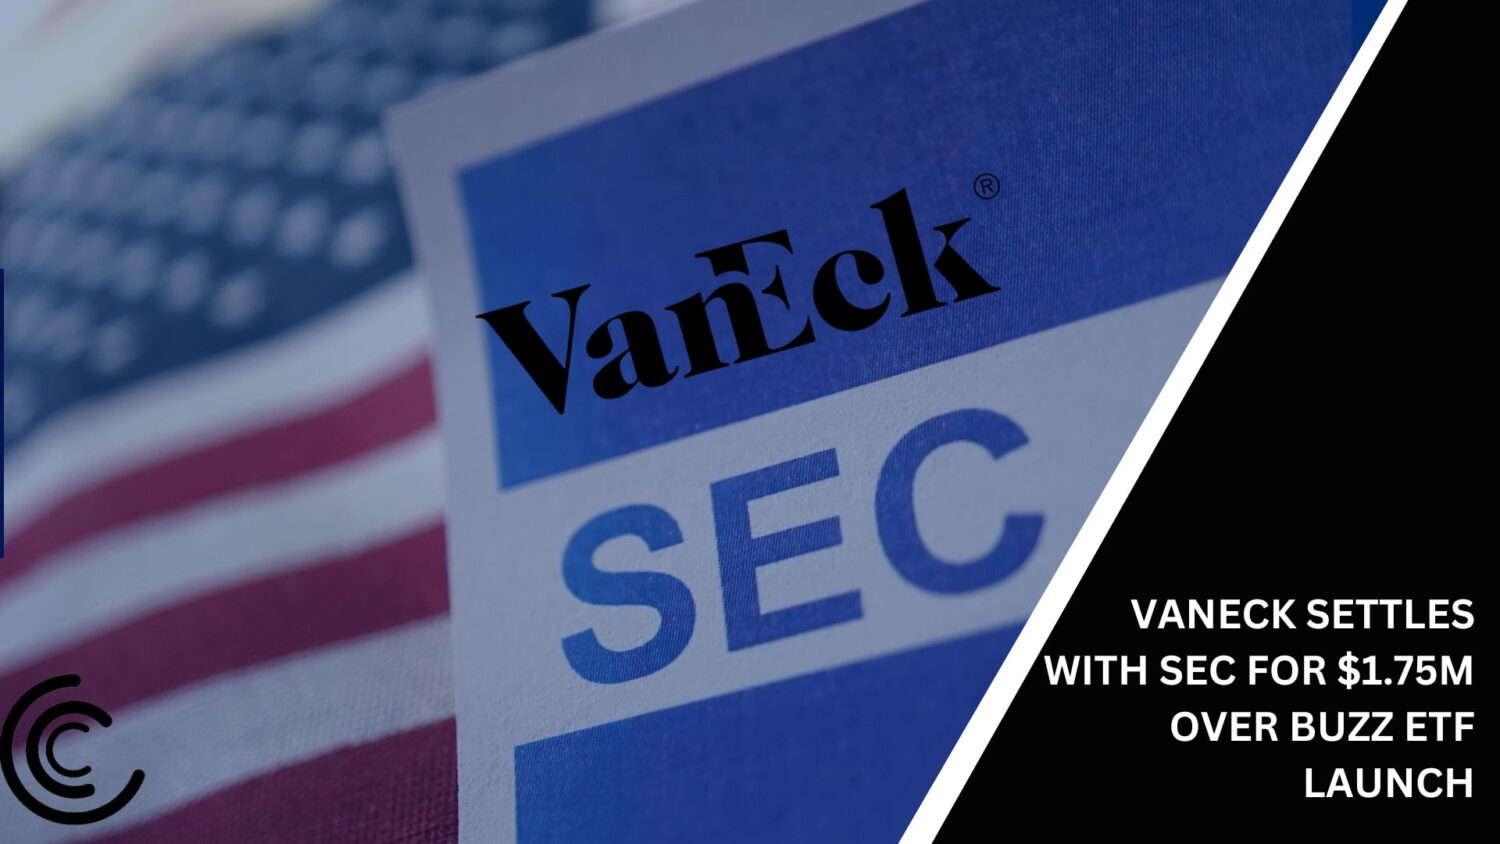 Vaneck Settles With Sec For $1.75M Over Buzz Etf Launch